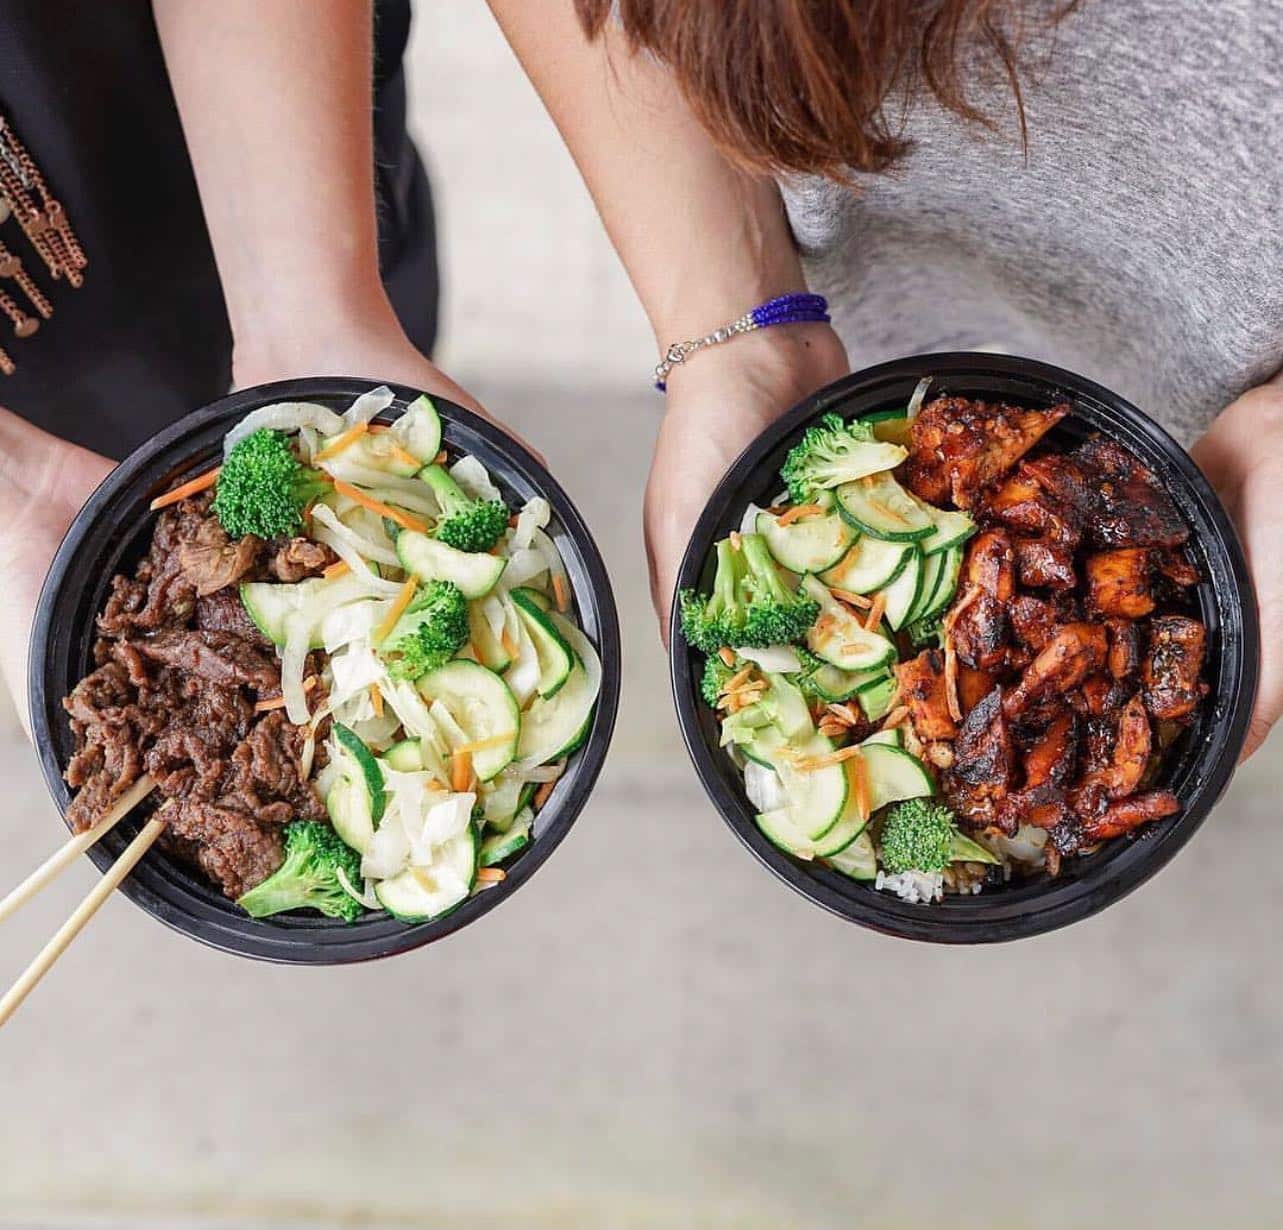 Sharing is caring! Download and sign up for the Teriyaki Madness app and receive a free bowl with a purchase of one bowl and two drinks.